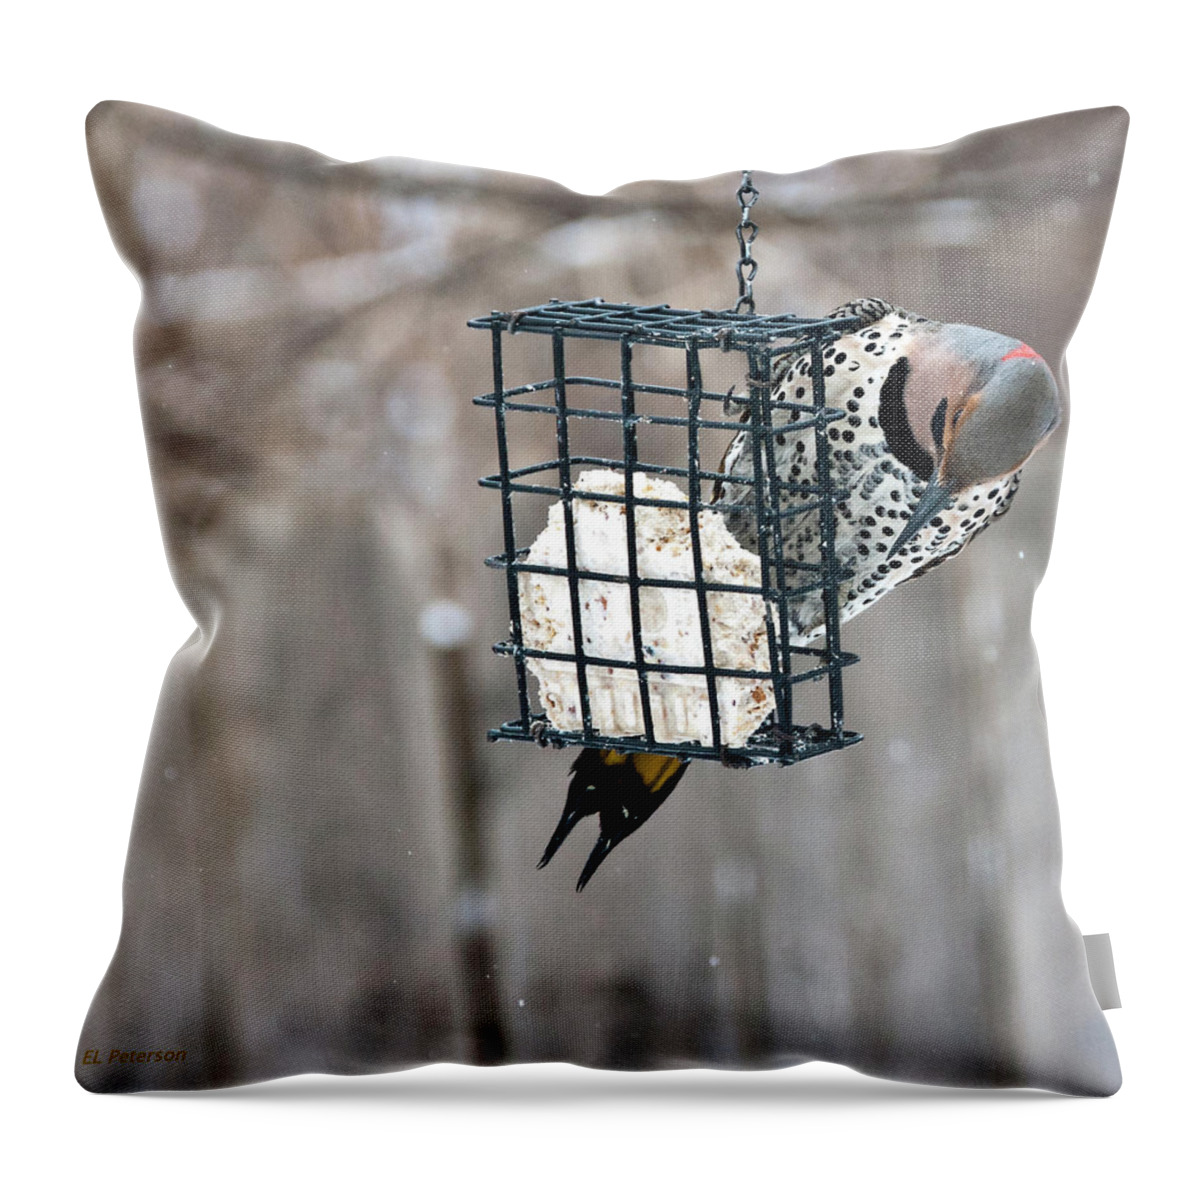 Yellow Shafted Northern Flicker Throw Pillow featuring the photograph Winter Feeding by Ed Peterson